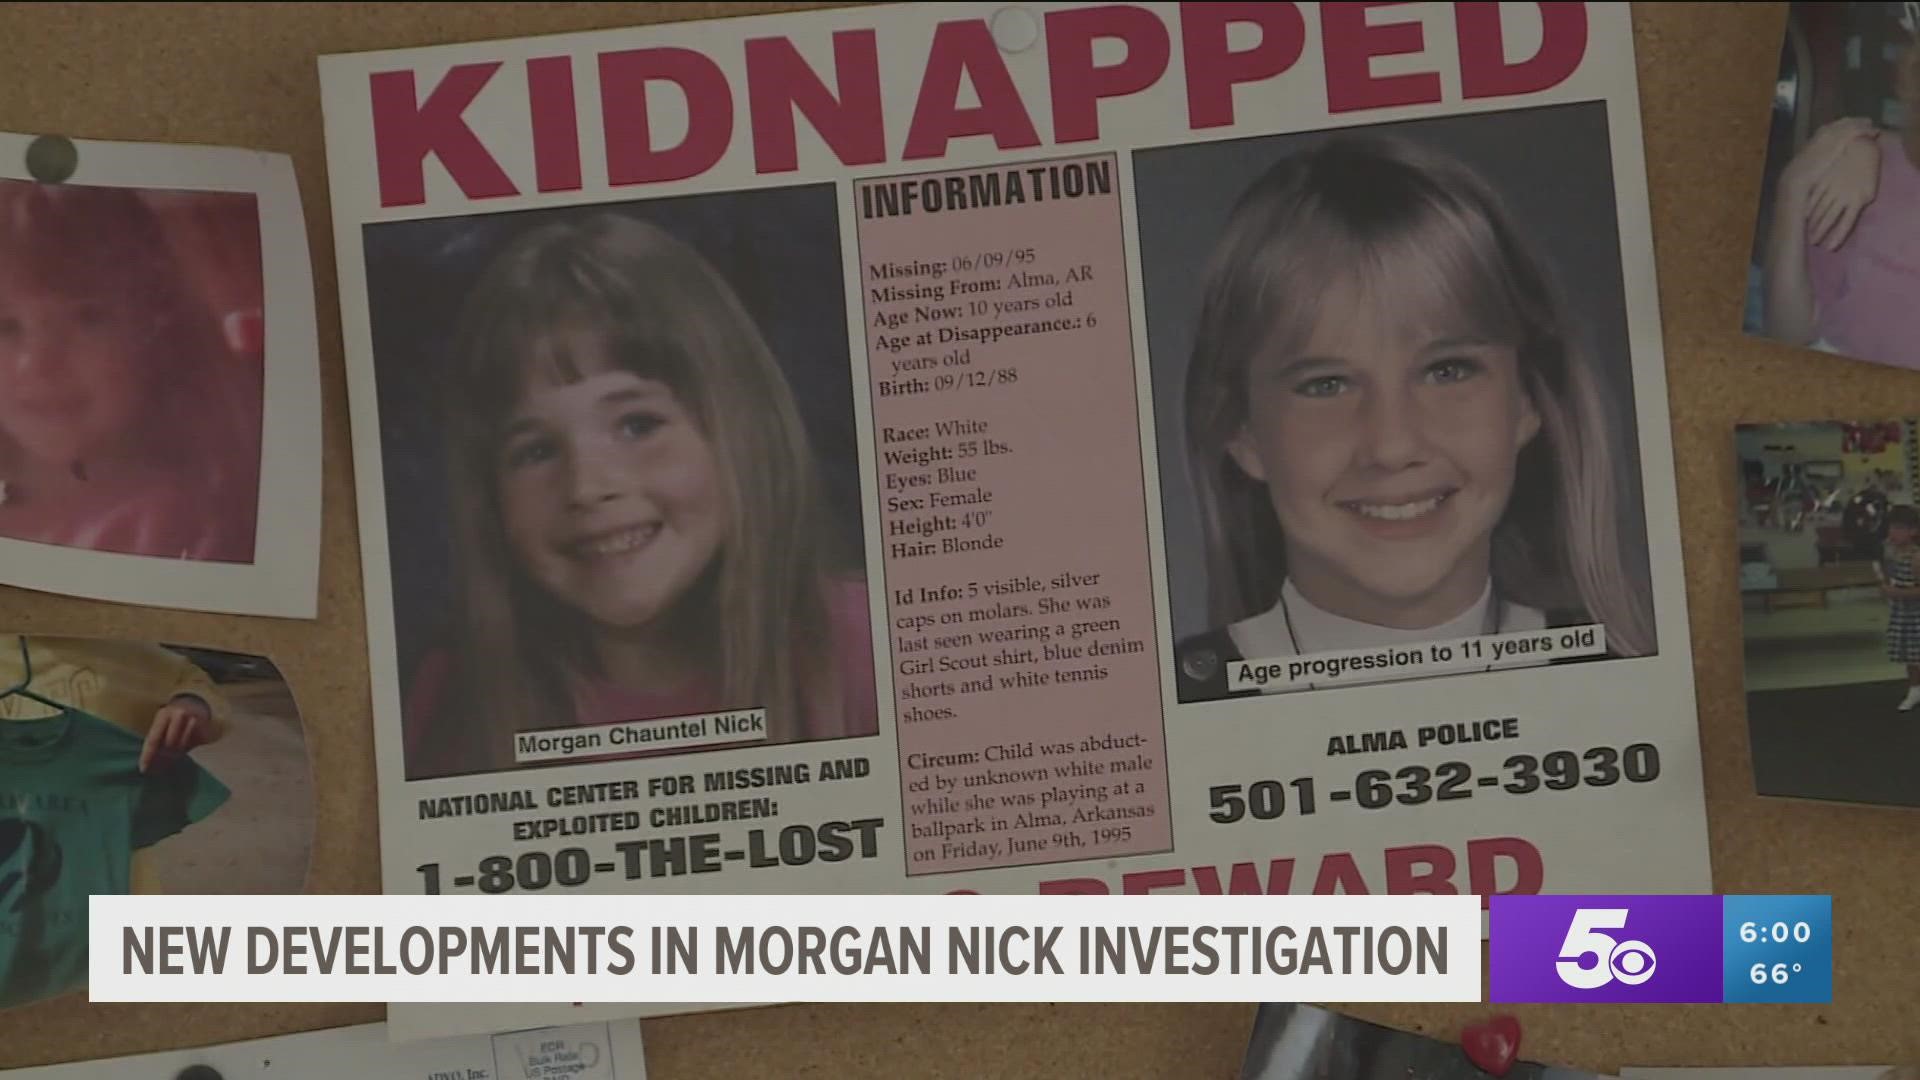 Billy Jack Lincks died in prison in 2000, but agents are looking for anyone who knew him who could help in the investigation into Morgan's disappearance.